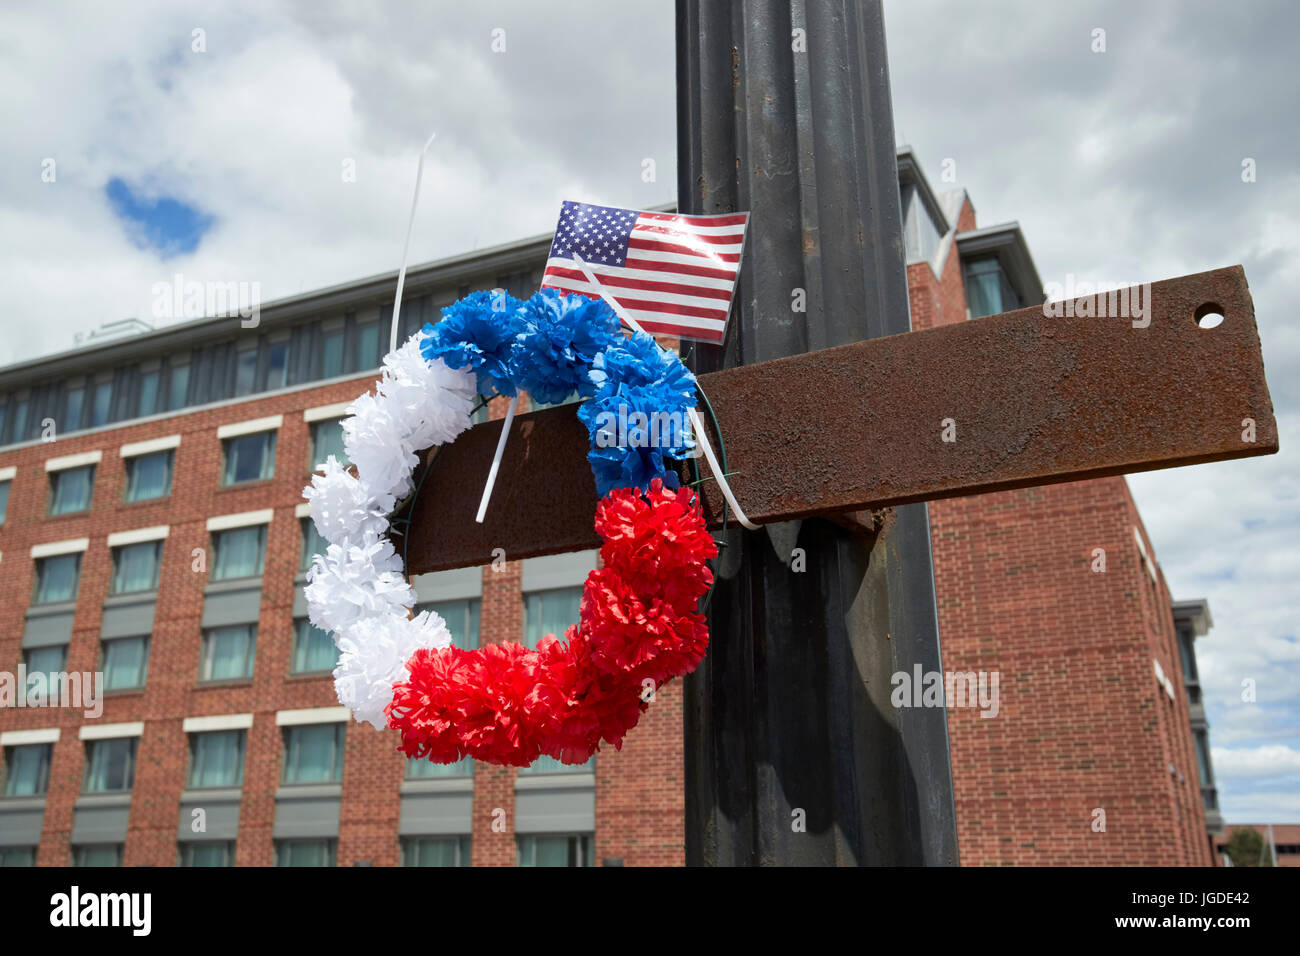 red white and blue memorial circular wreath and us flag memorial for firefighter lt steve minehan at the site of warehouse fire Boston USA Stock Photo